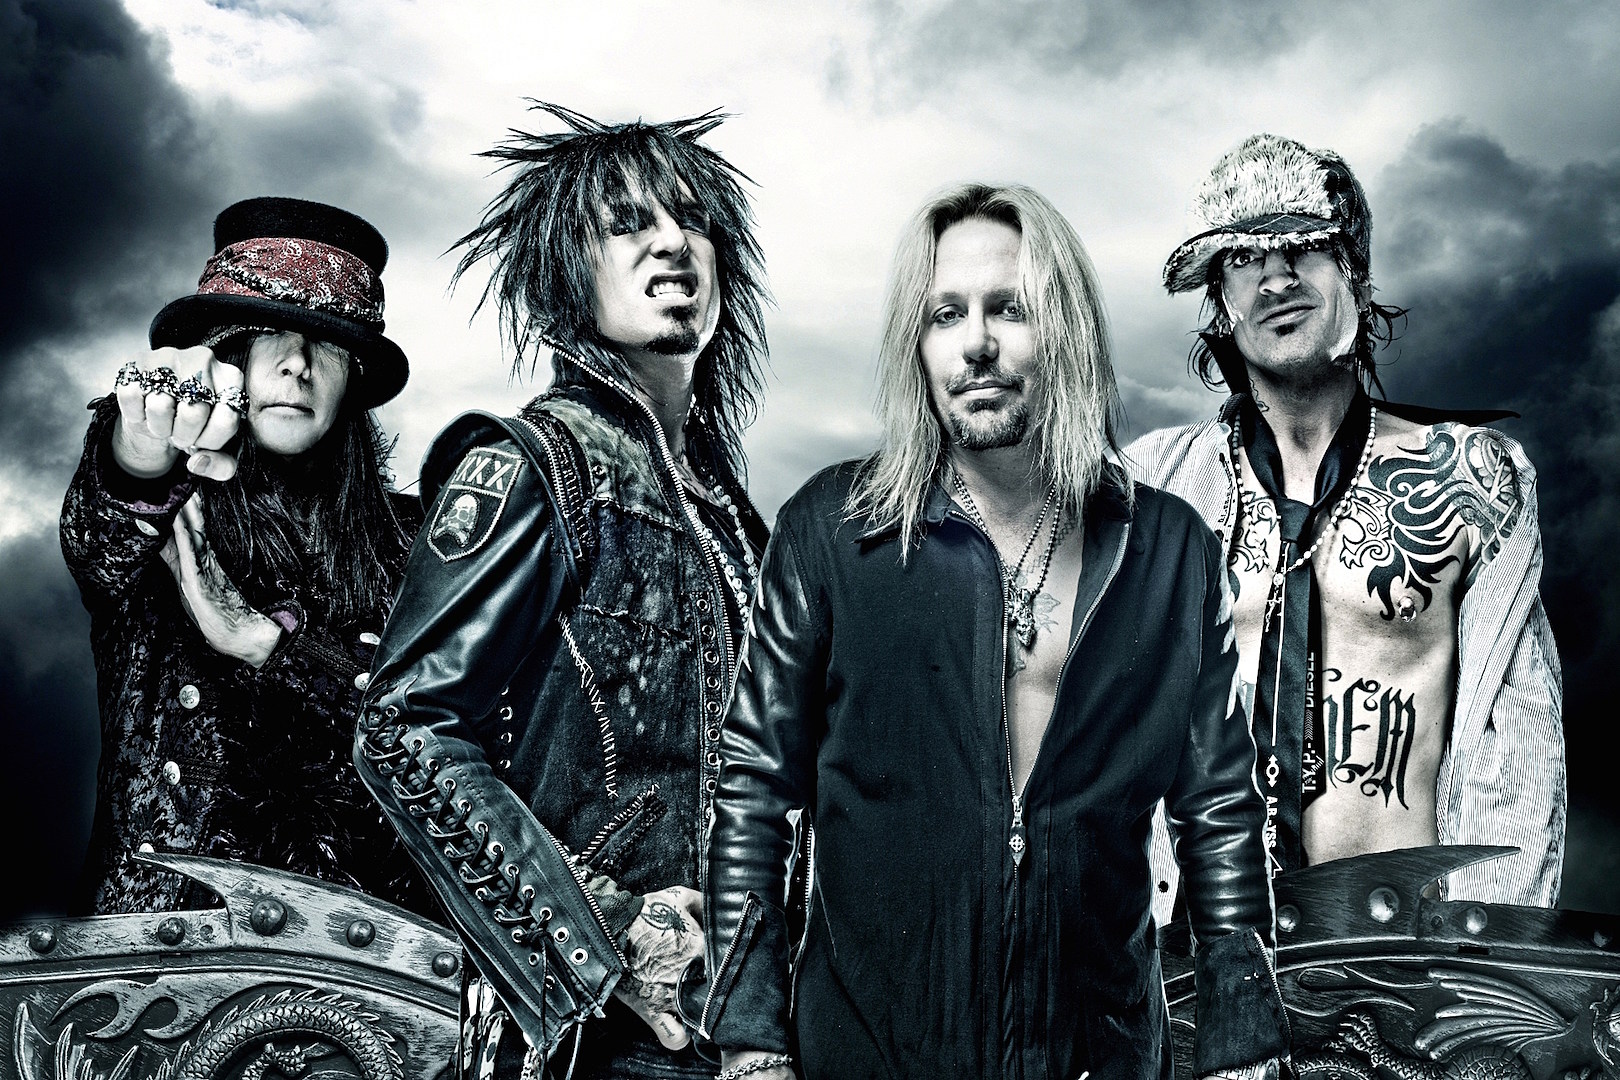 Motley Crue Release New Song 'The Dirt' Featuring Rapper